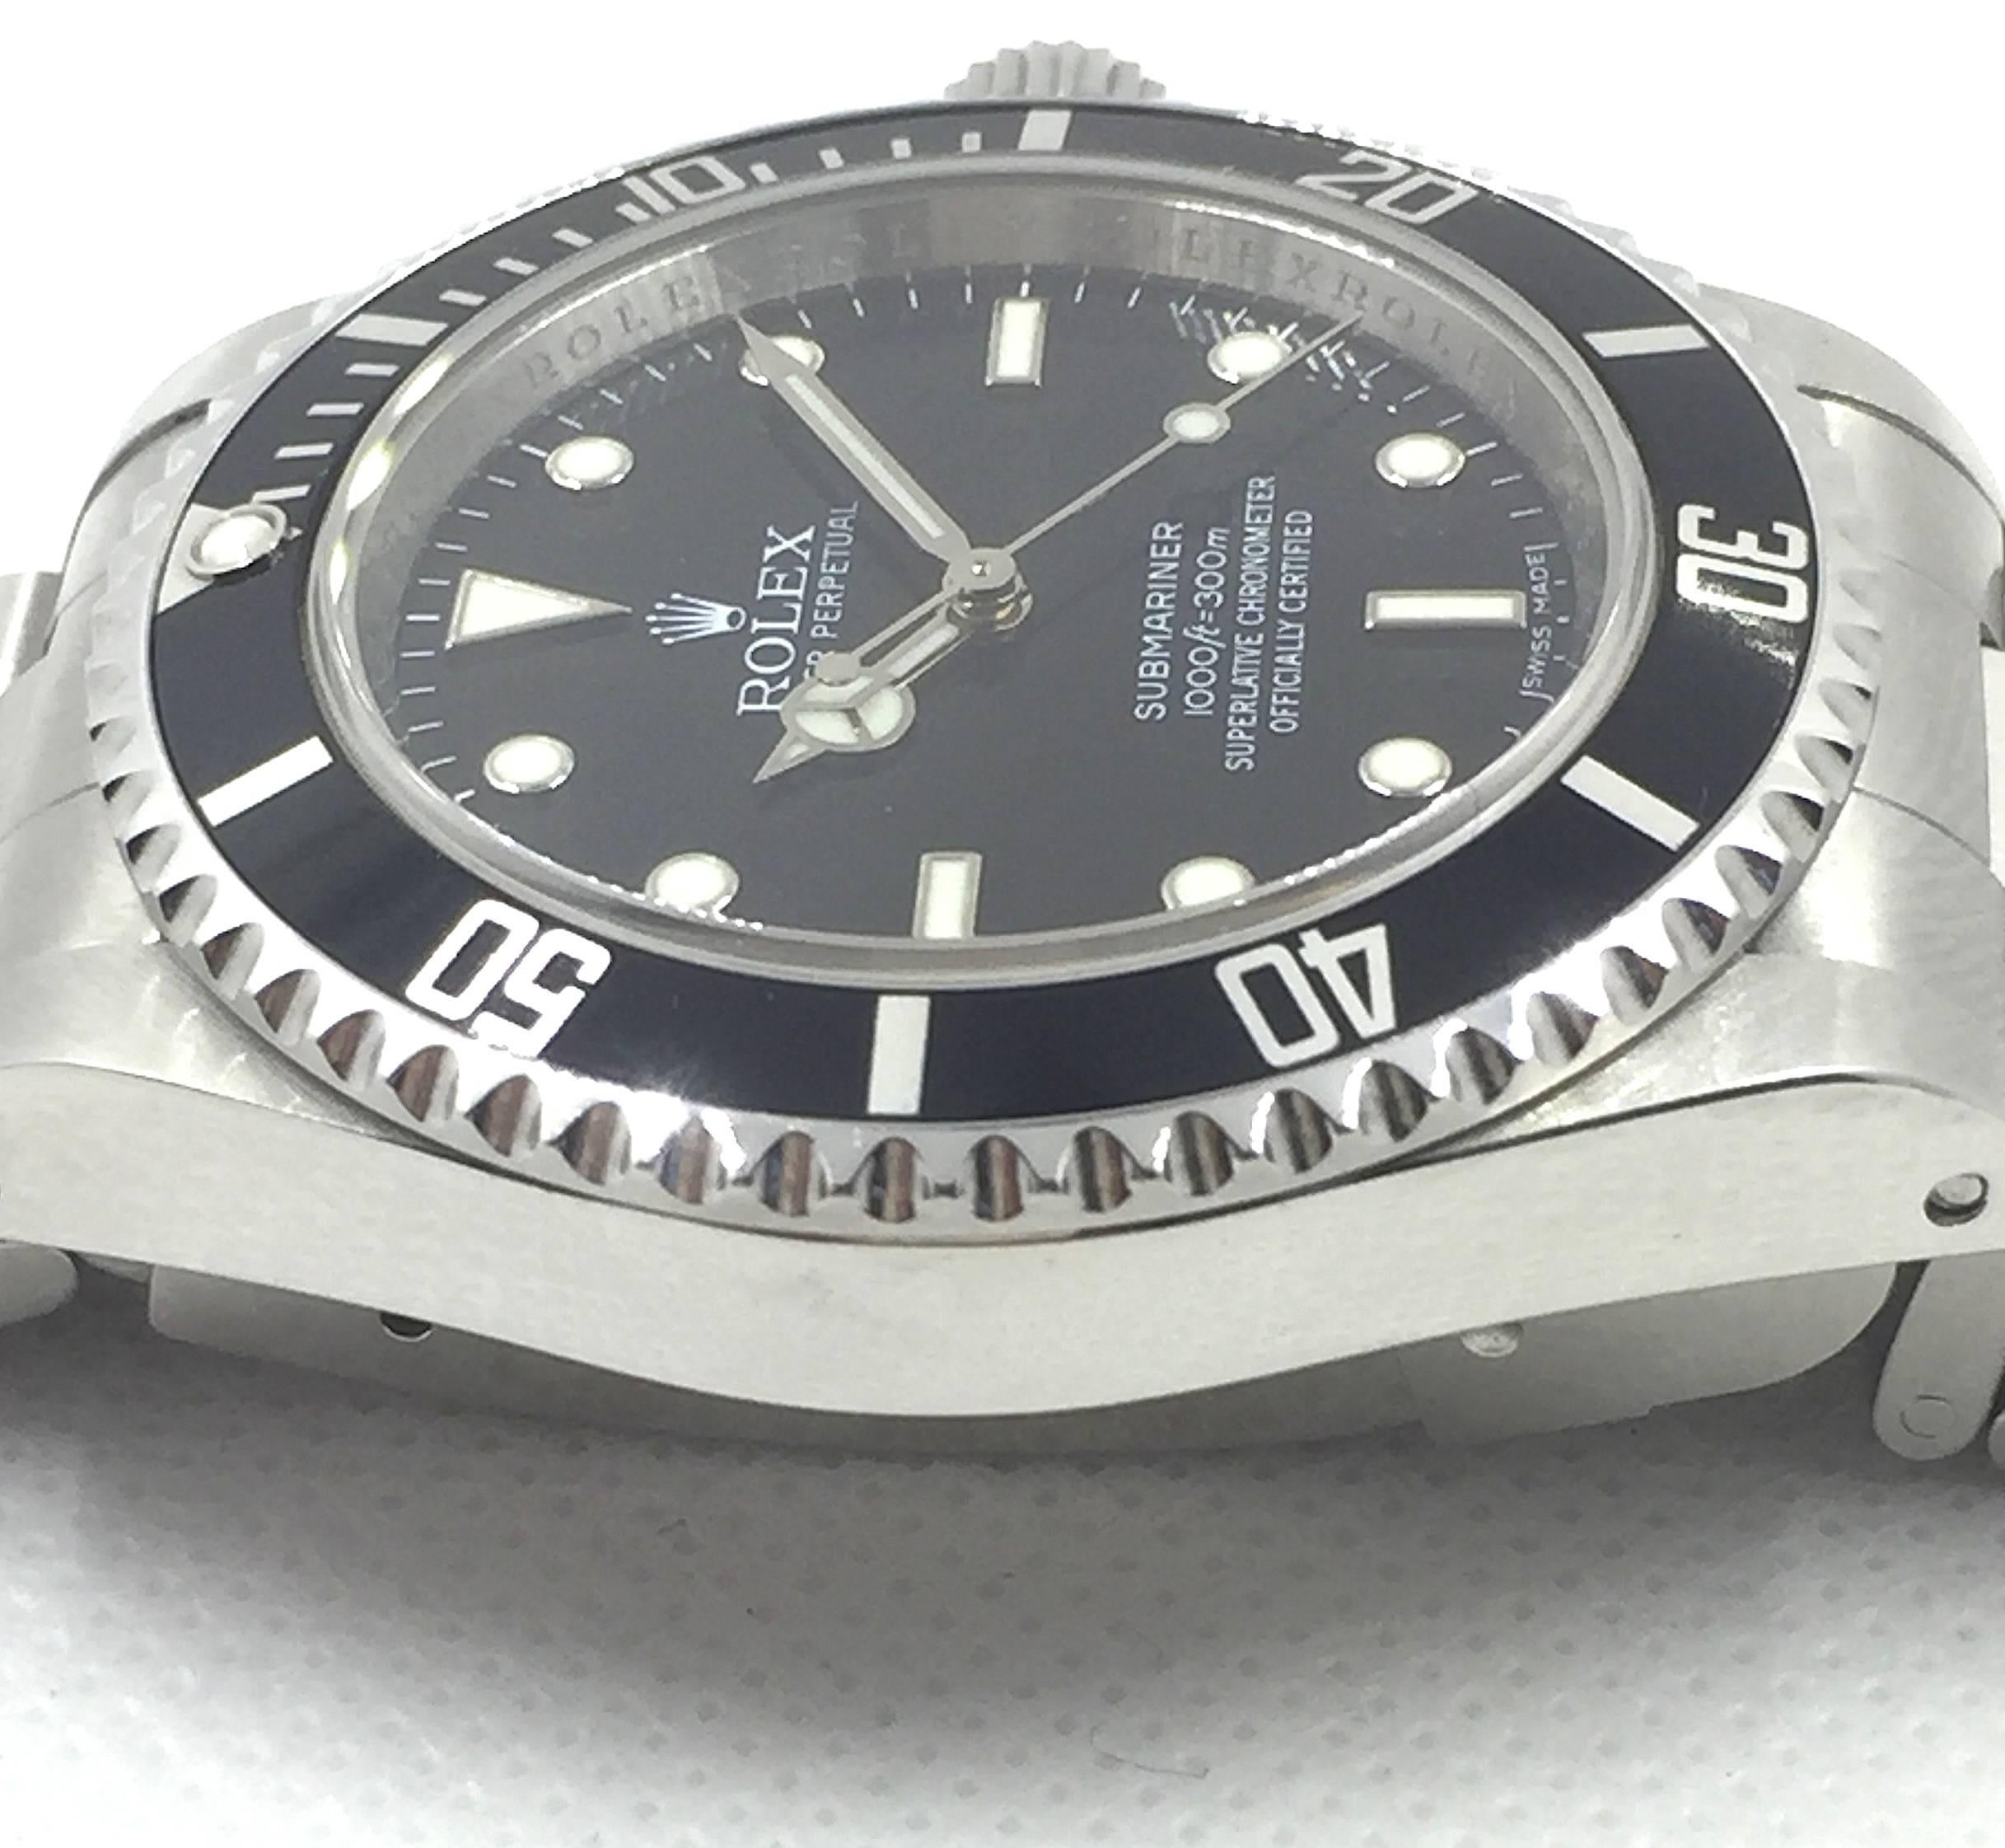 Rolex Stainless Steel Oyster Perpetual Submariner Wristwatch Ref 14060M 1